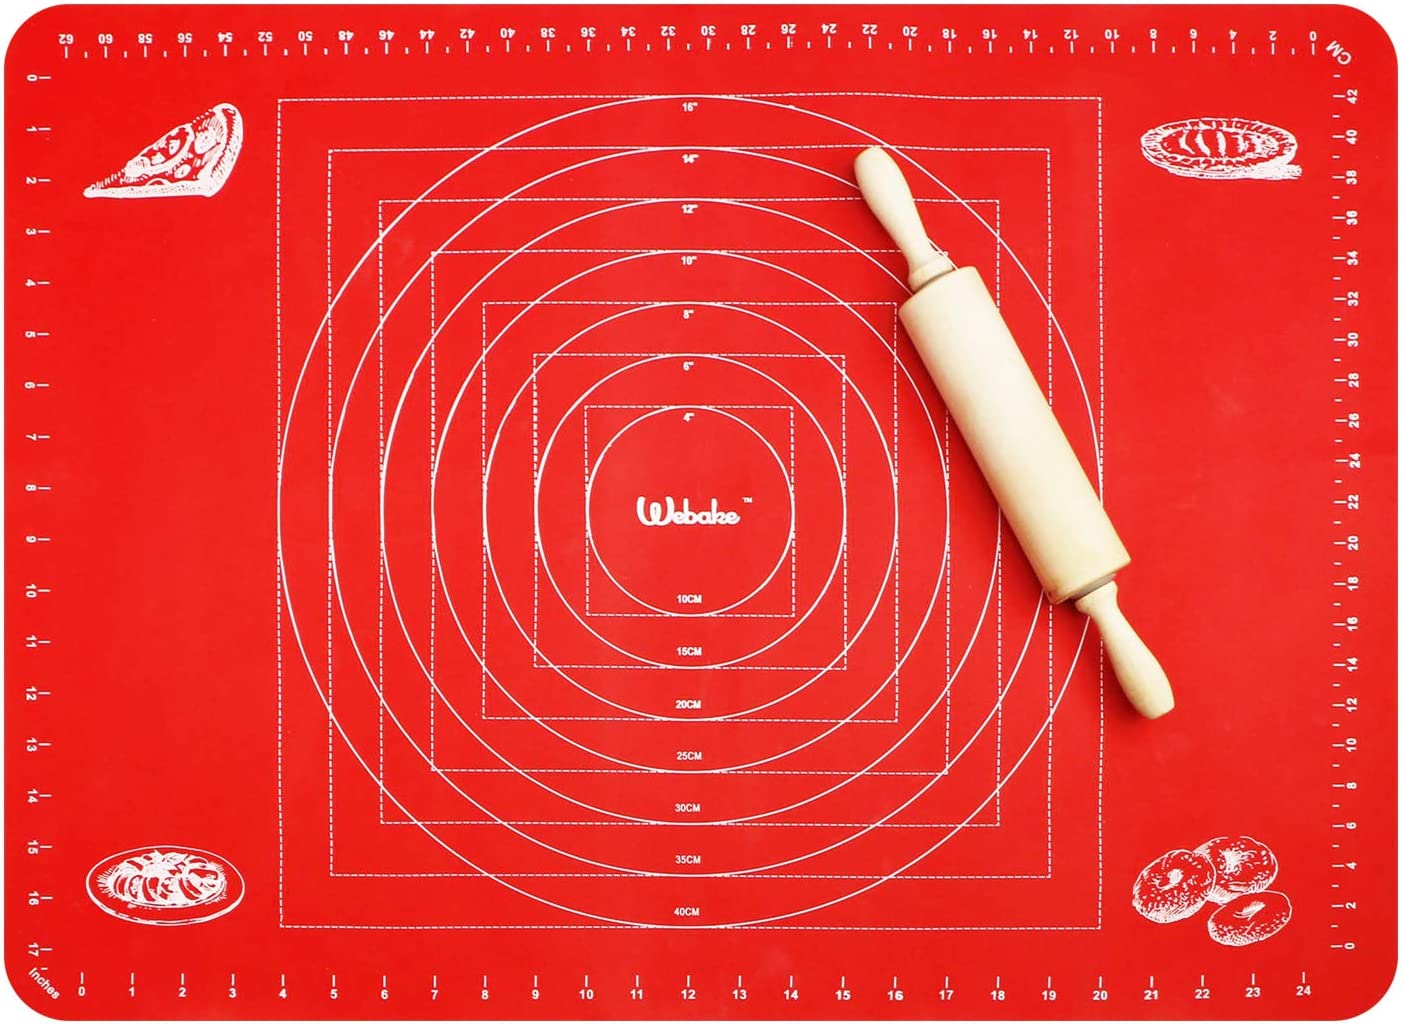 Silicone Pastry Mat, Non-stick Baking Mat With Measurements, Non